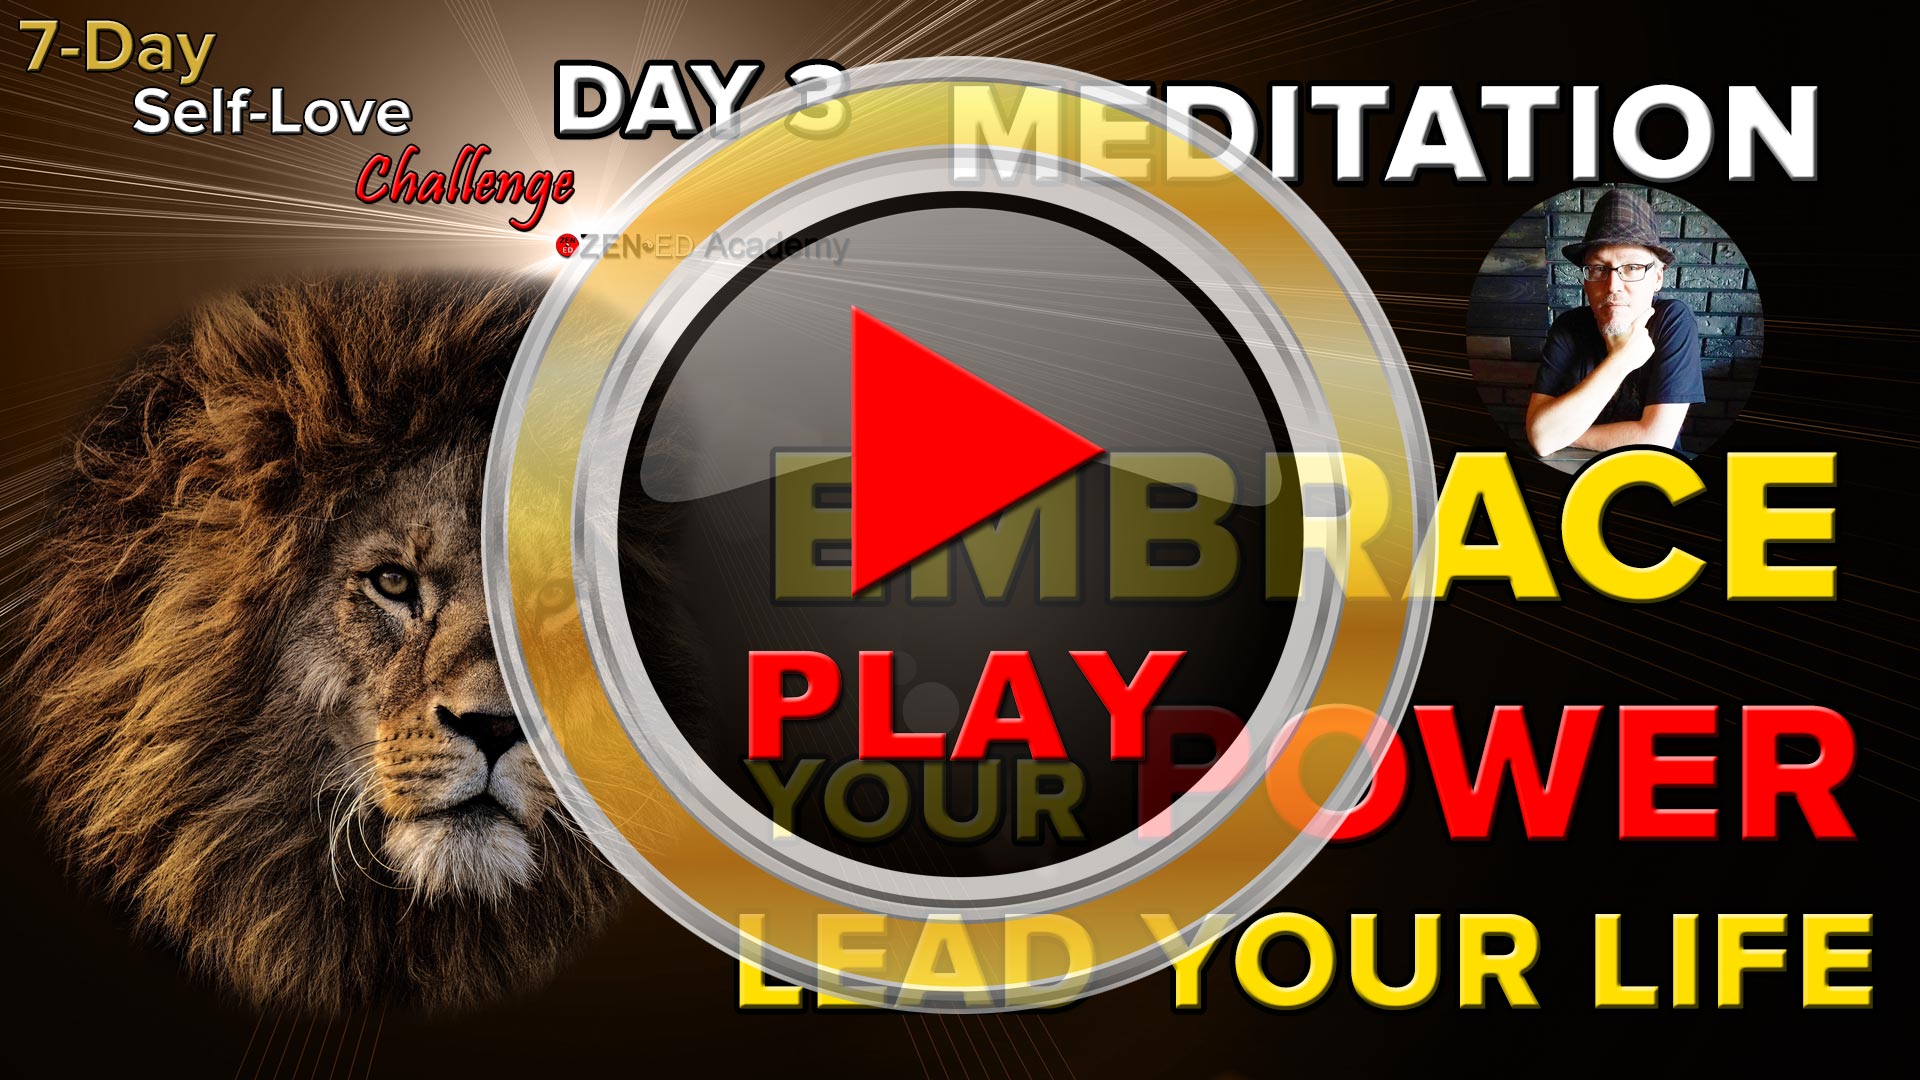 Play Meditation Day 3: Embrace Your Power Lead Your Life (Thumbnail) Zen Ed Academy's Free 7-Day Self-Love Challenge